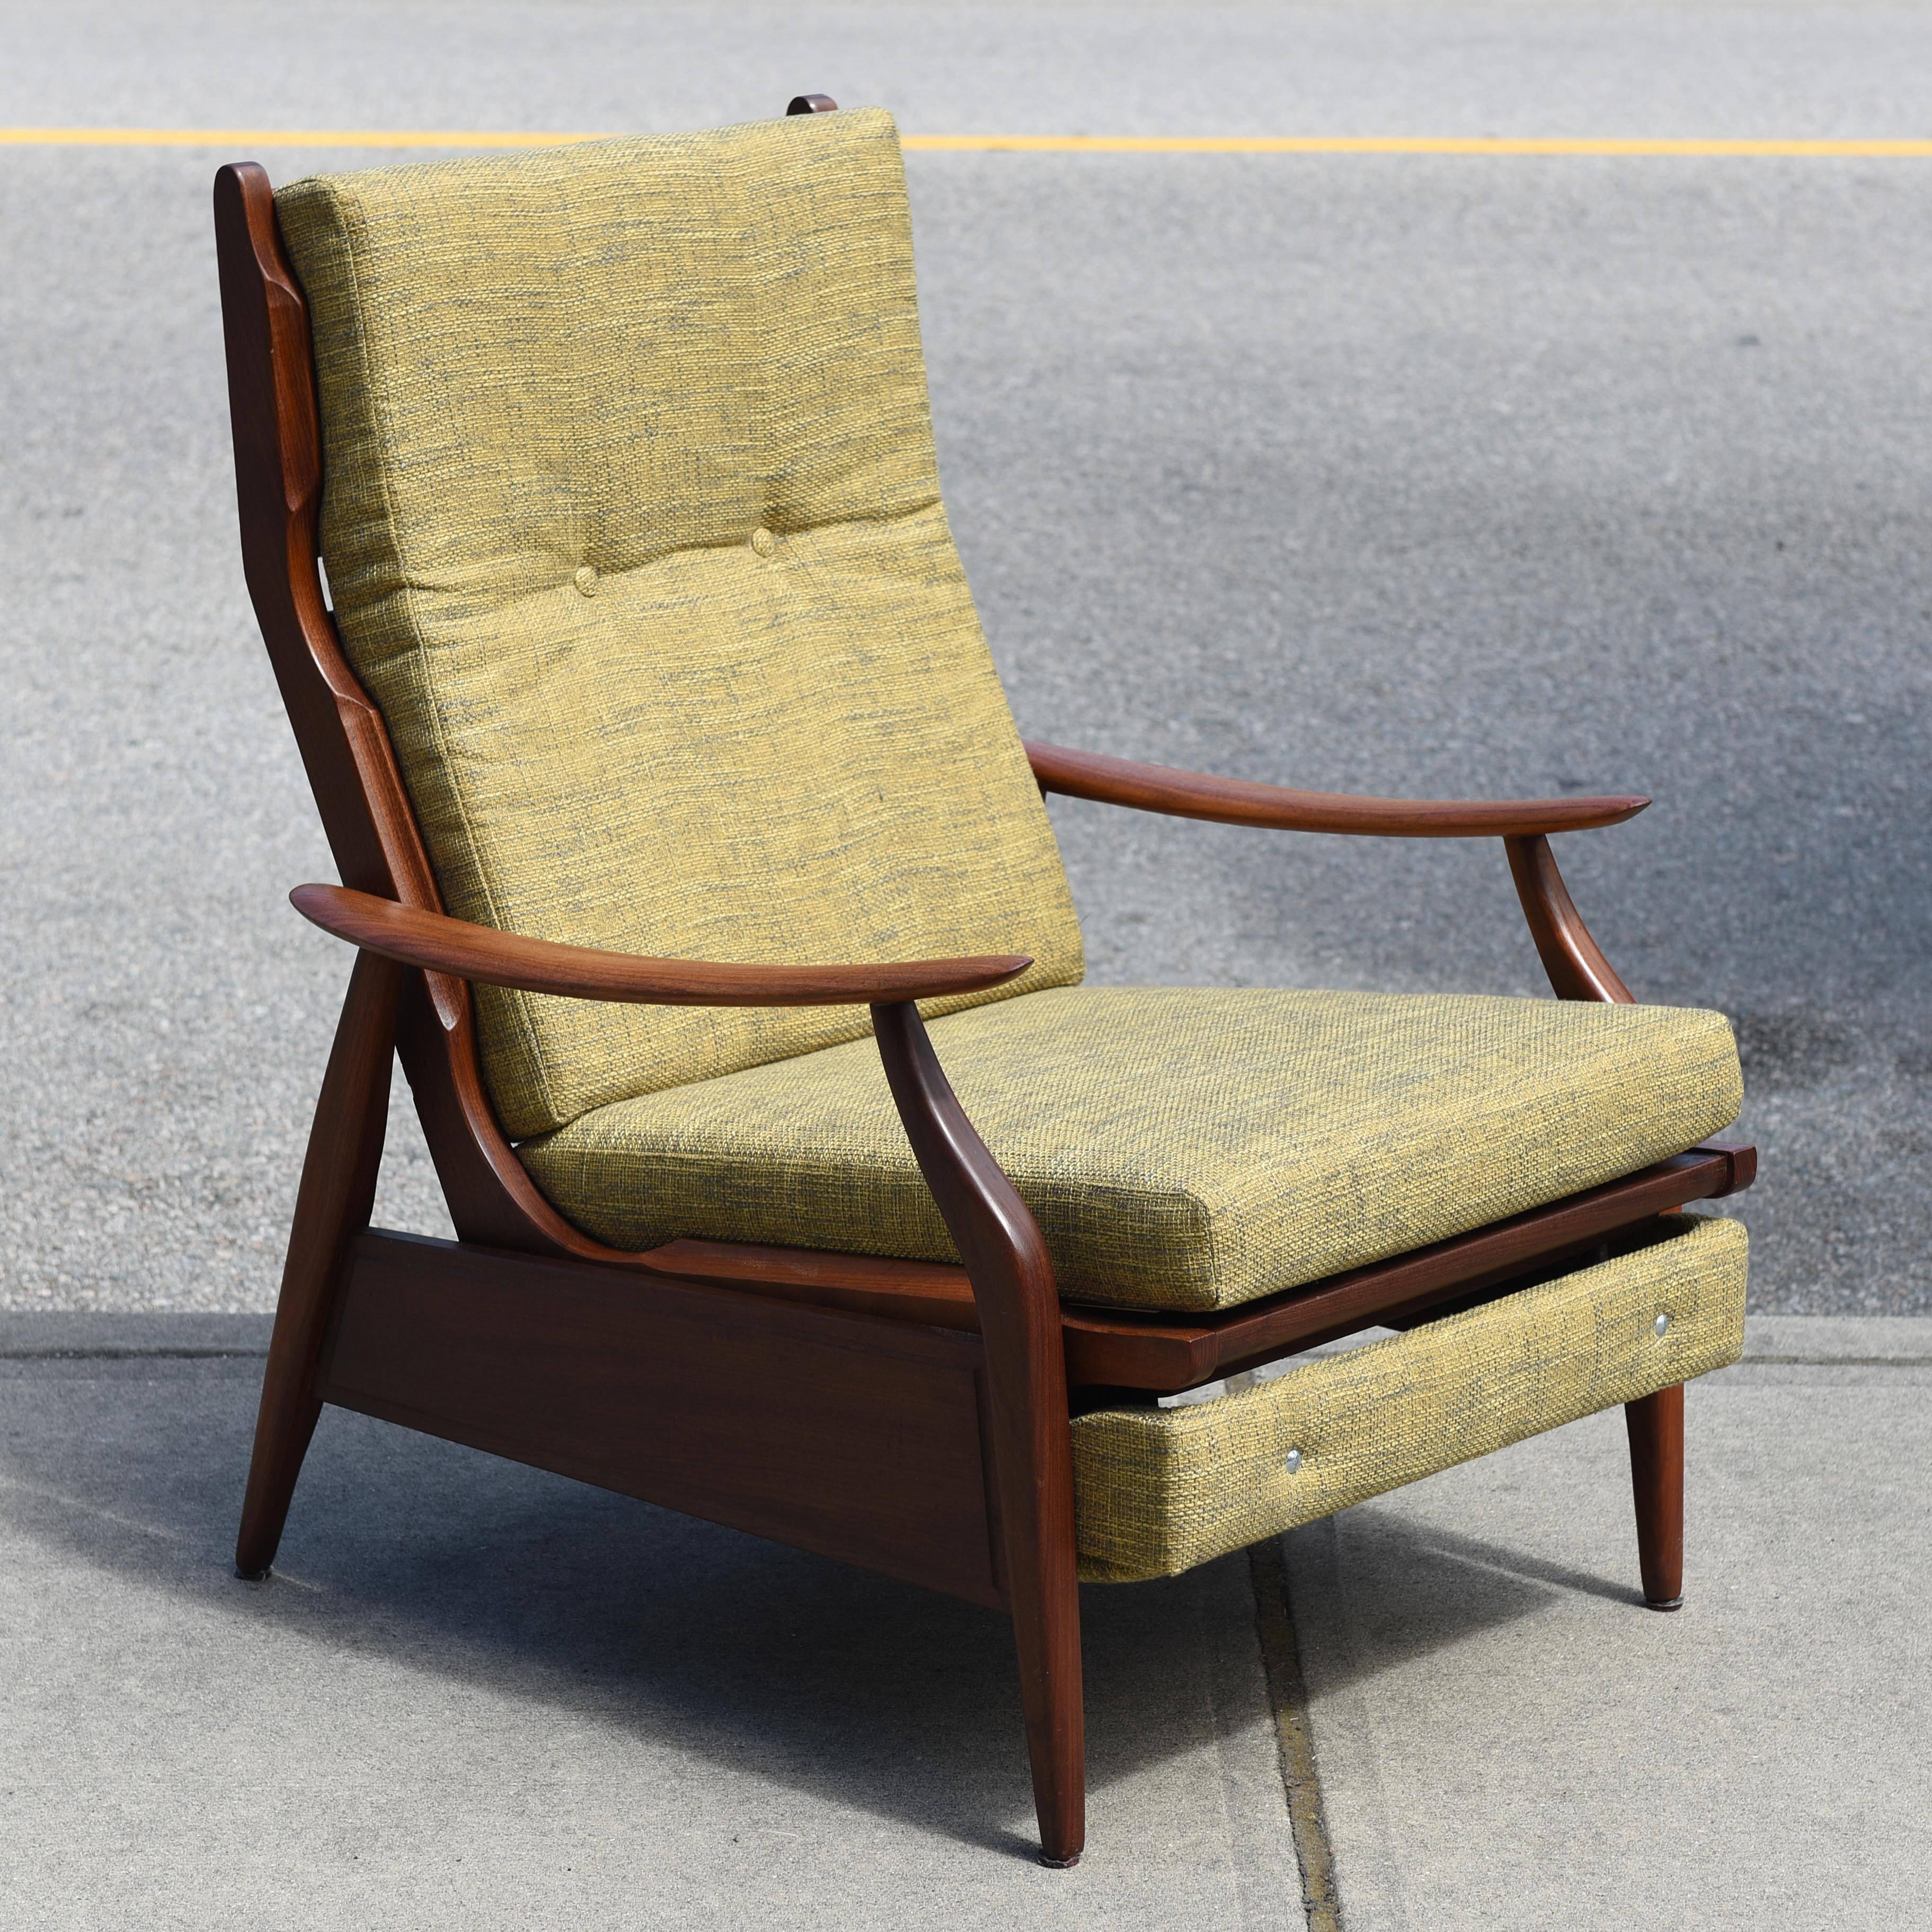 A beautiful Mid-Century Afrormosia recliner by R.S. Associates Ltd. of Canada. Excellent original condition with new foam and upholstery.